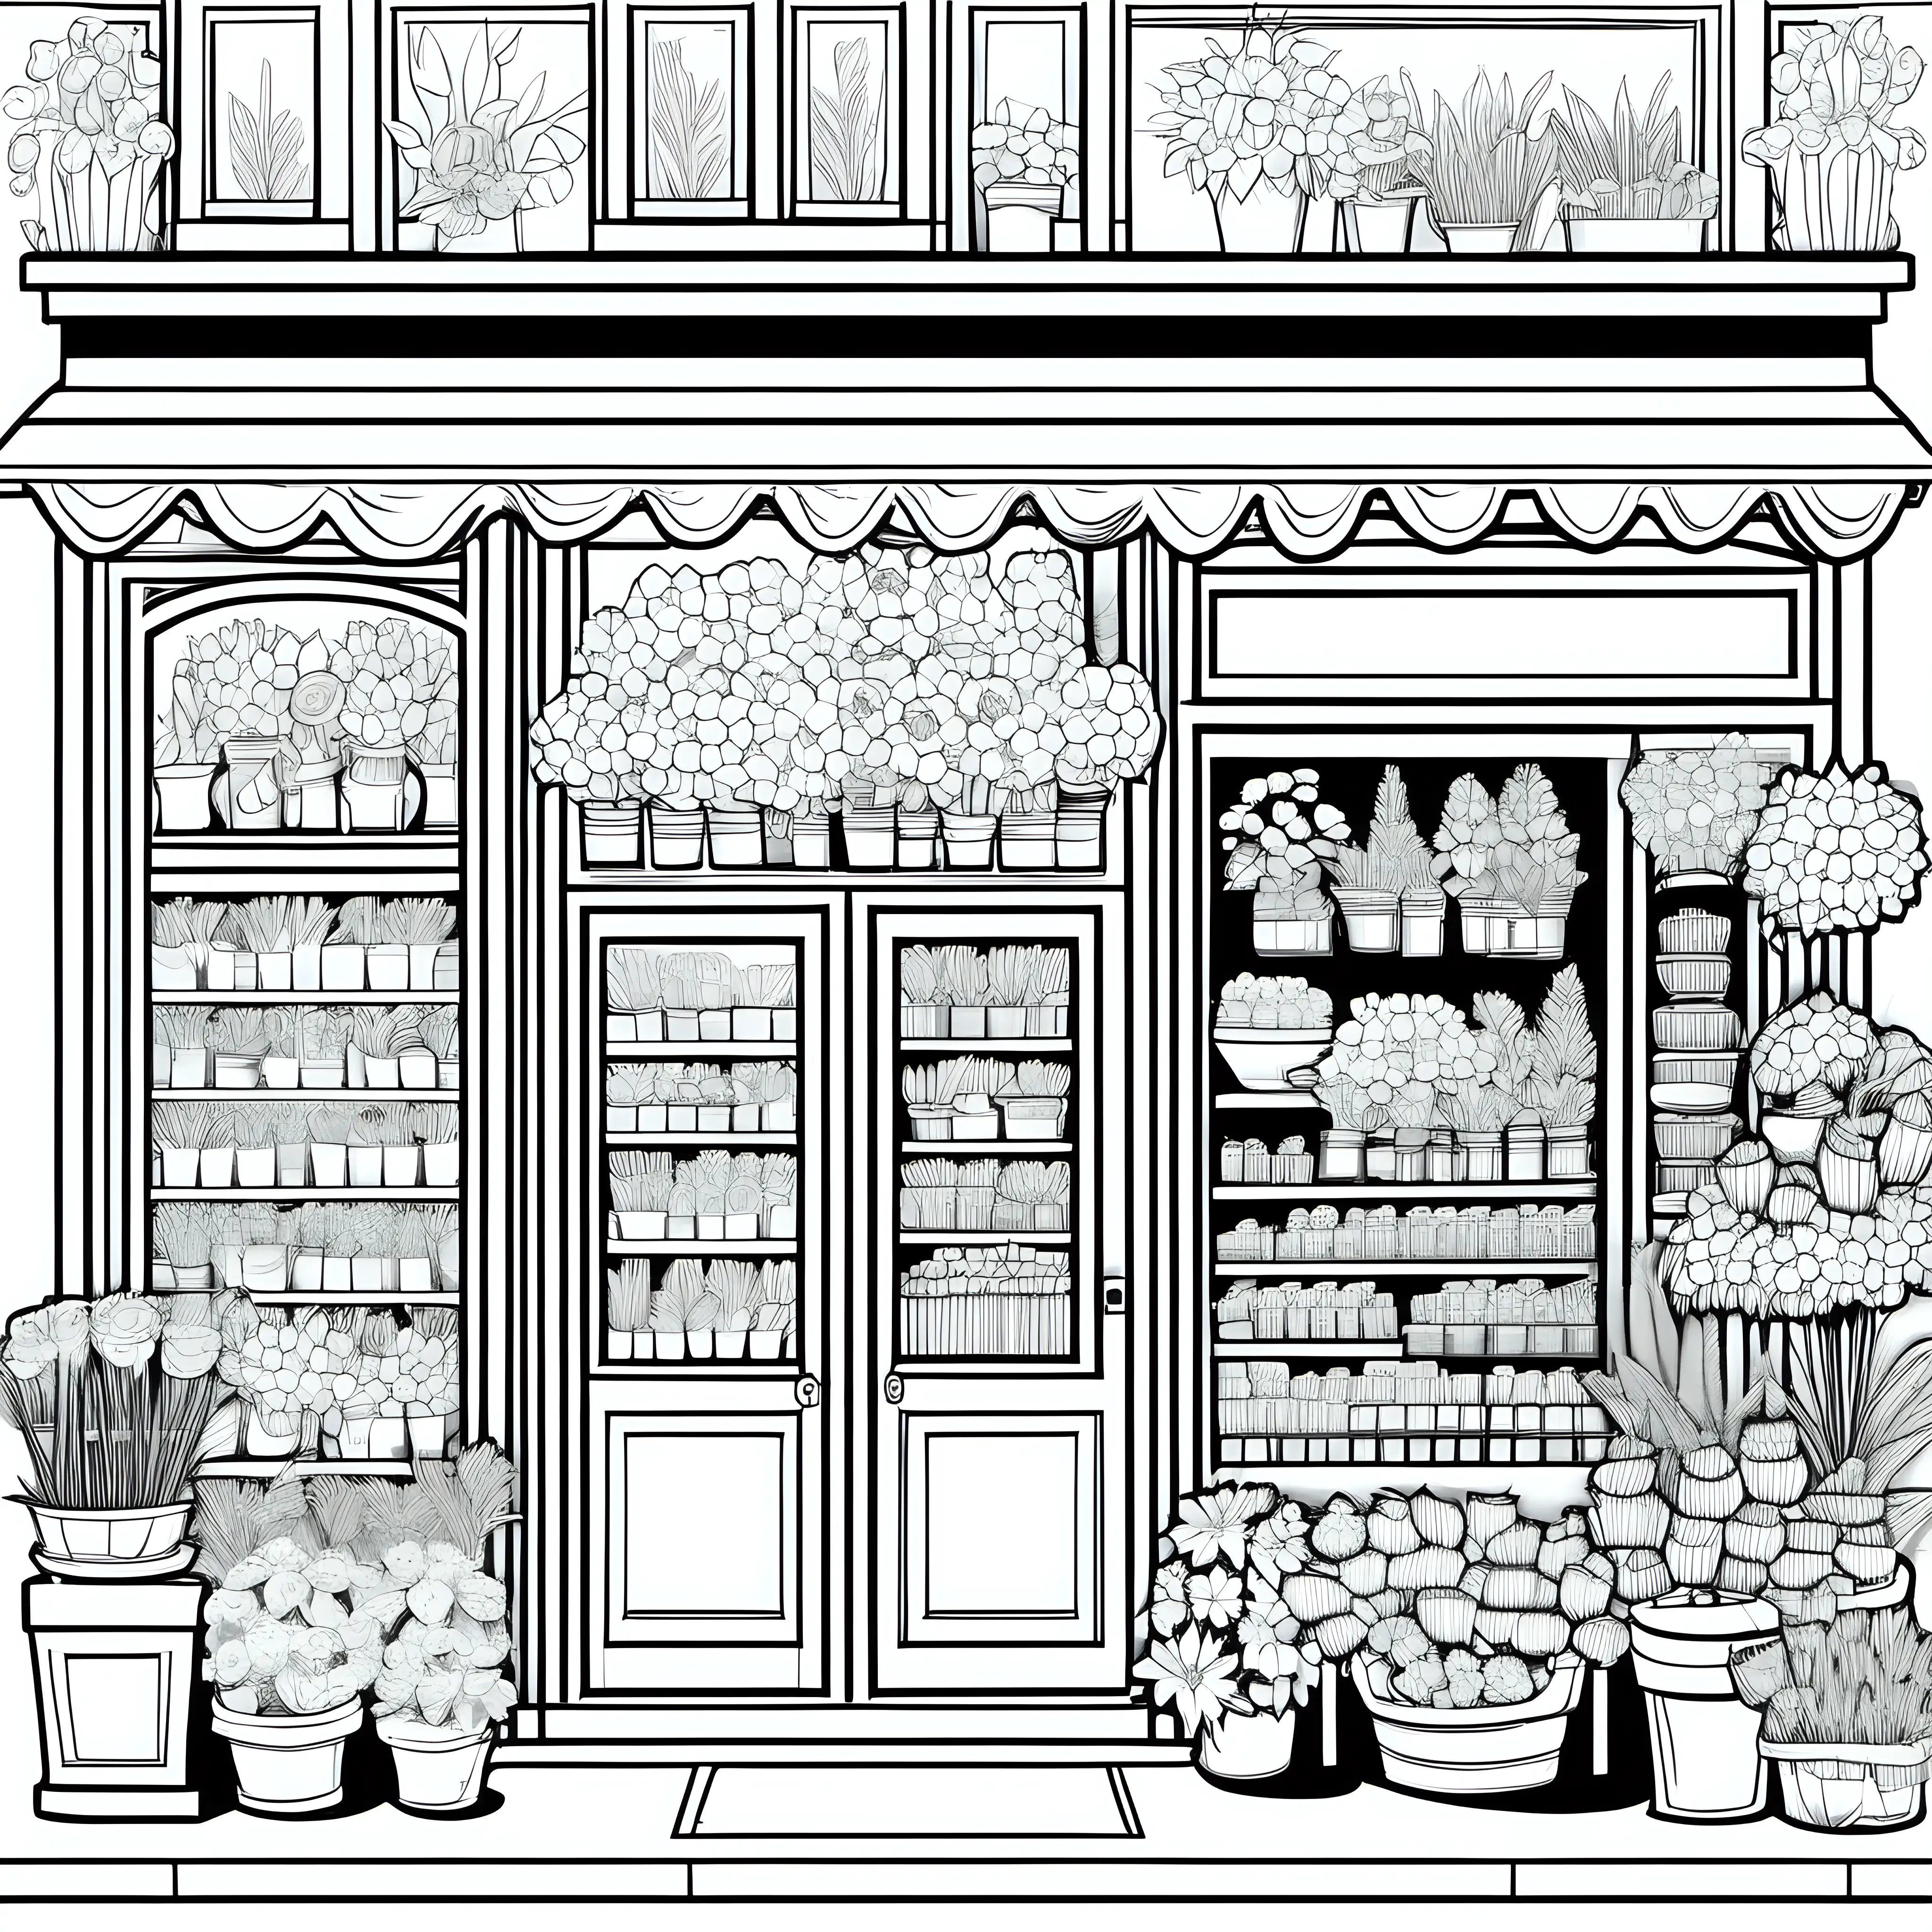 Design a coloring book black and white, high contrast 2-d of a store front of a flower shop in A. Durer style 